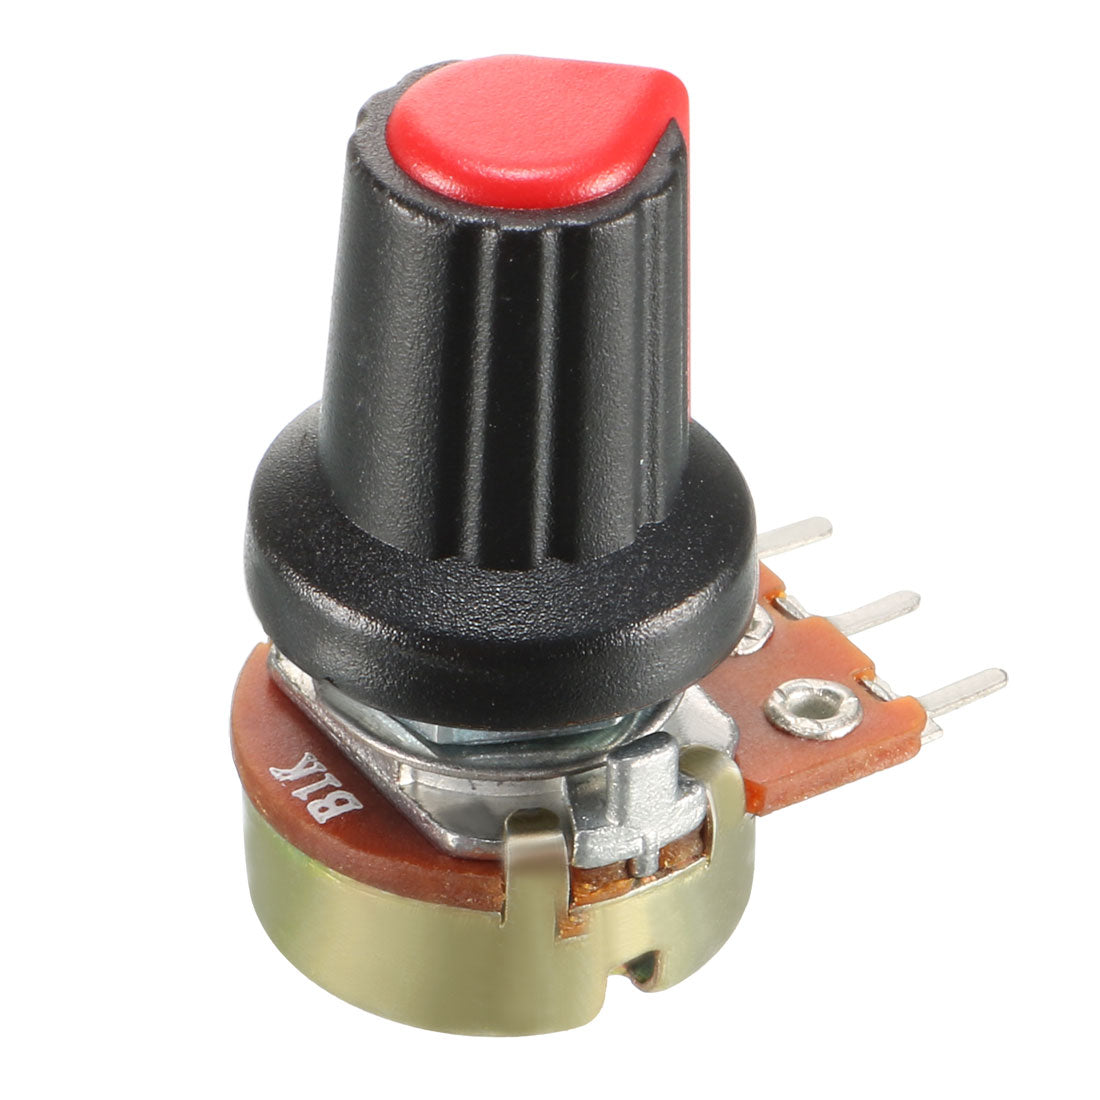 uxcell Uxcell 5Pcs 1K Ohm Variable Resistors Single Turn Rotary Carbon Film Taper Potentiometer with Knobs